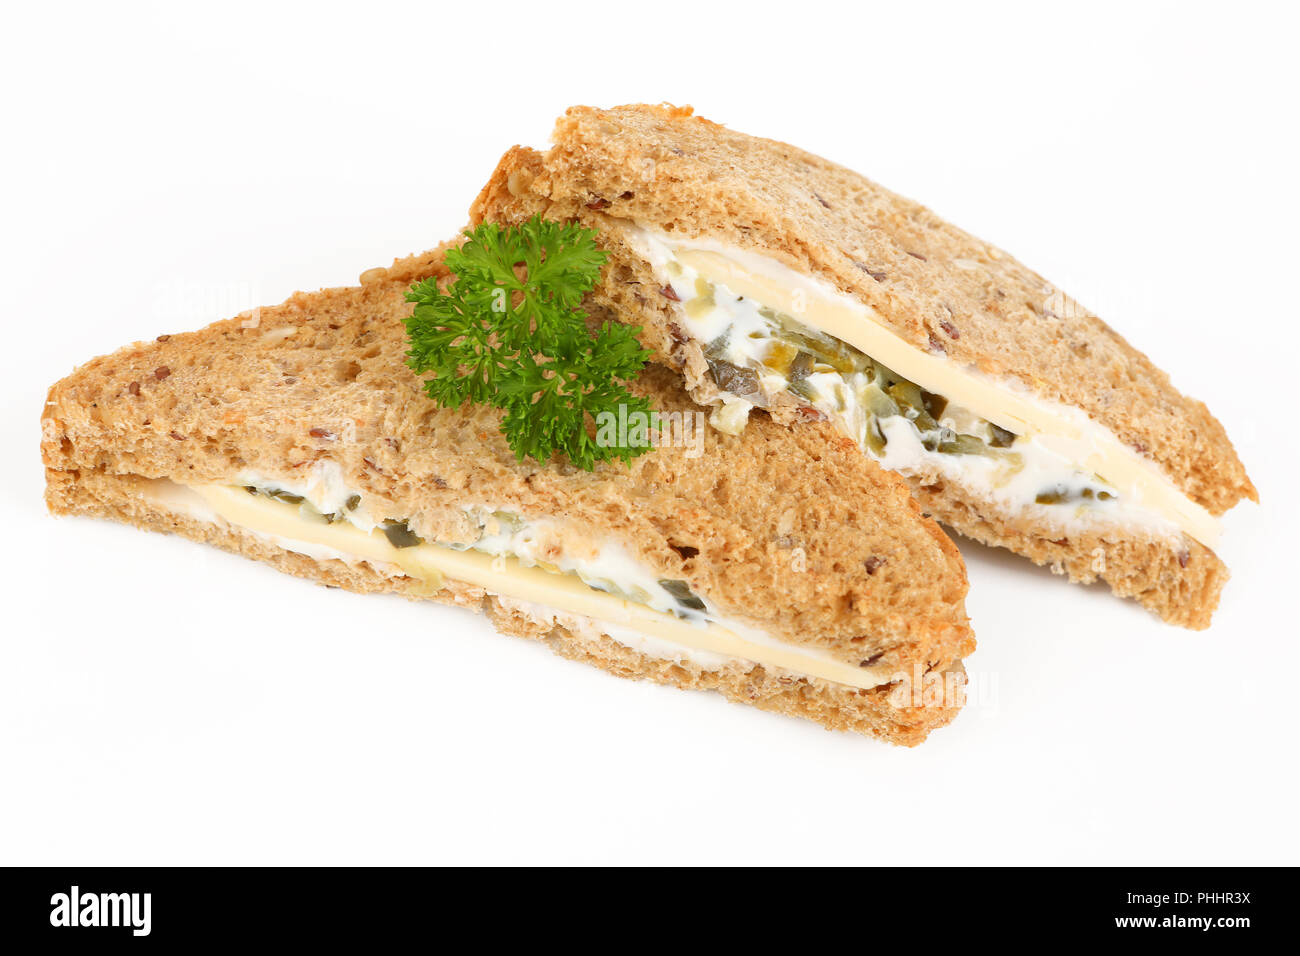 Sandwich with cheese Stock Photo